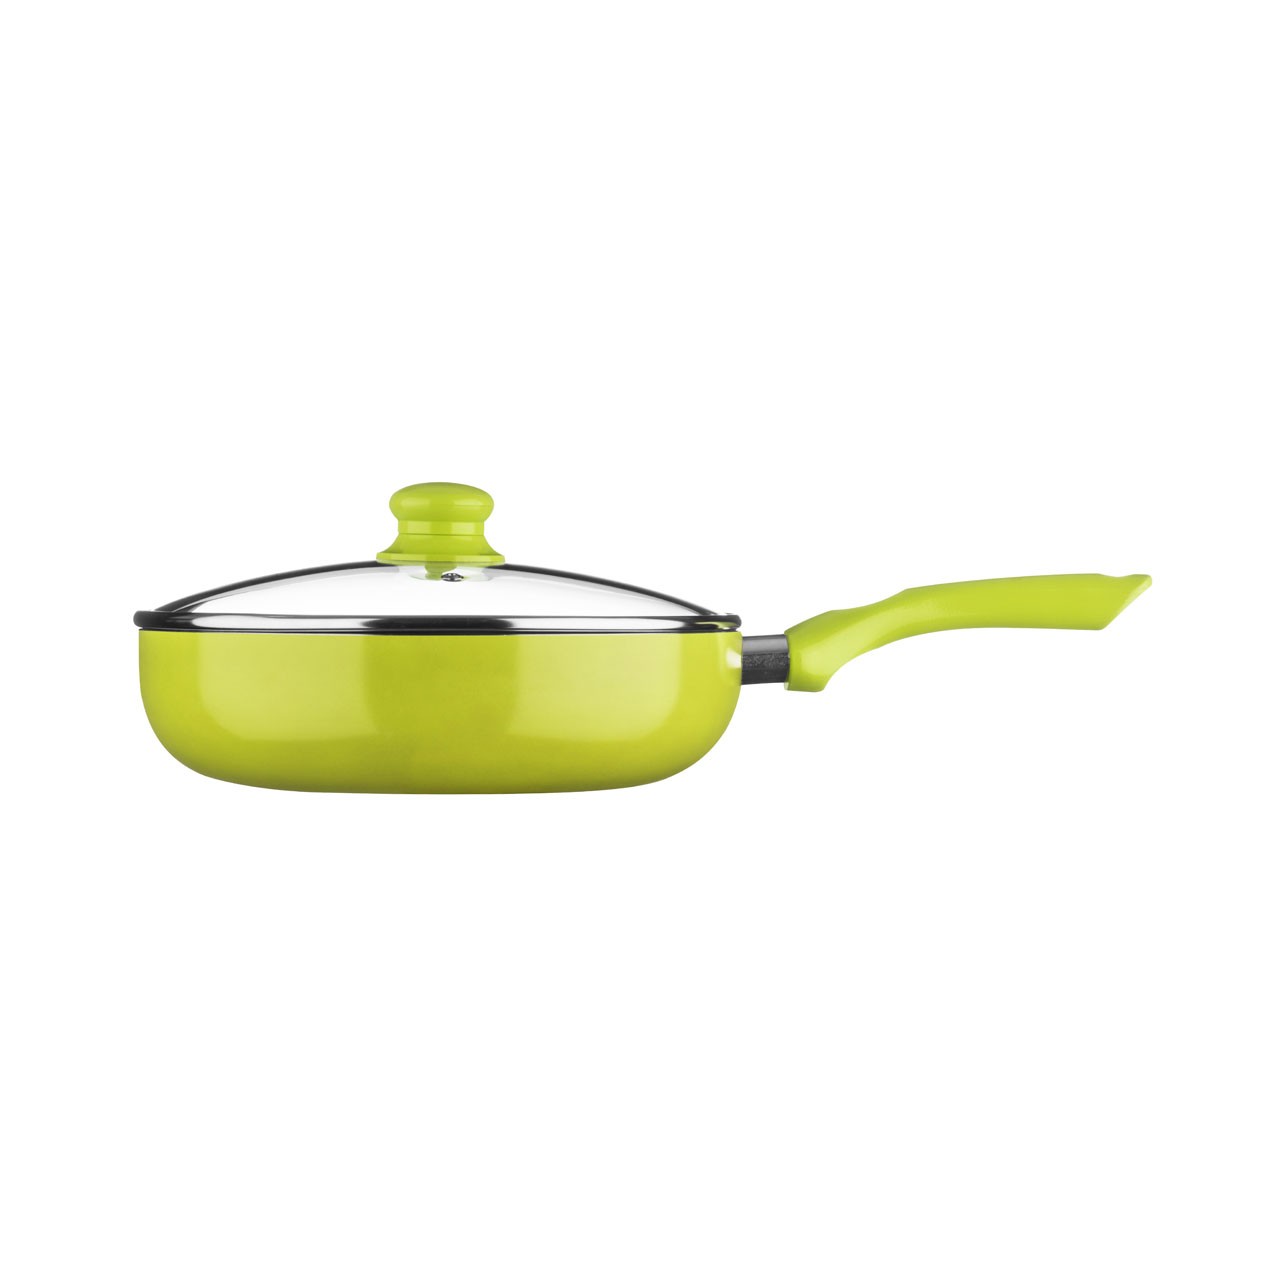 Ecocook Frying Pan with Glass Lid - 26 cm, Lime Green